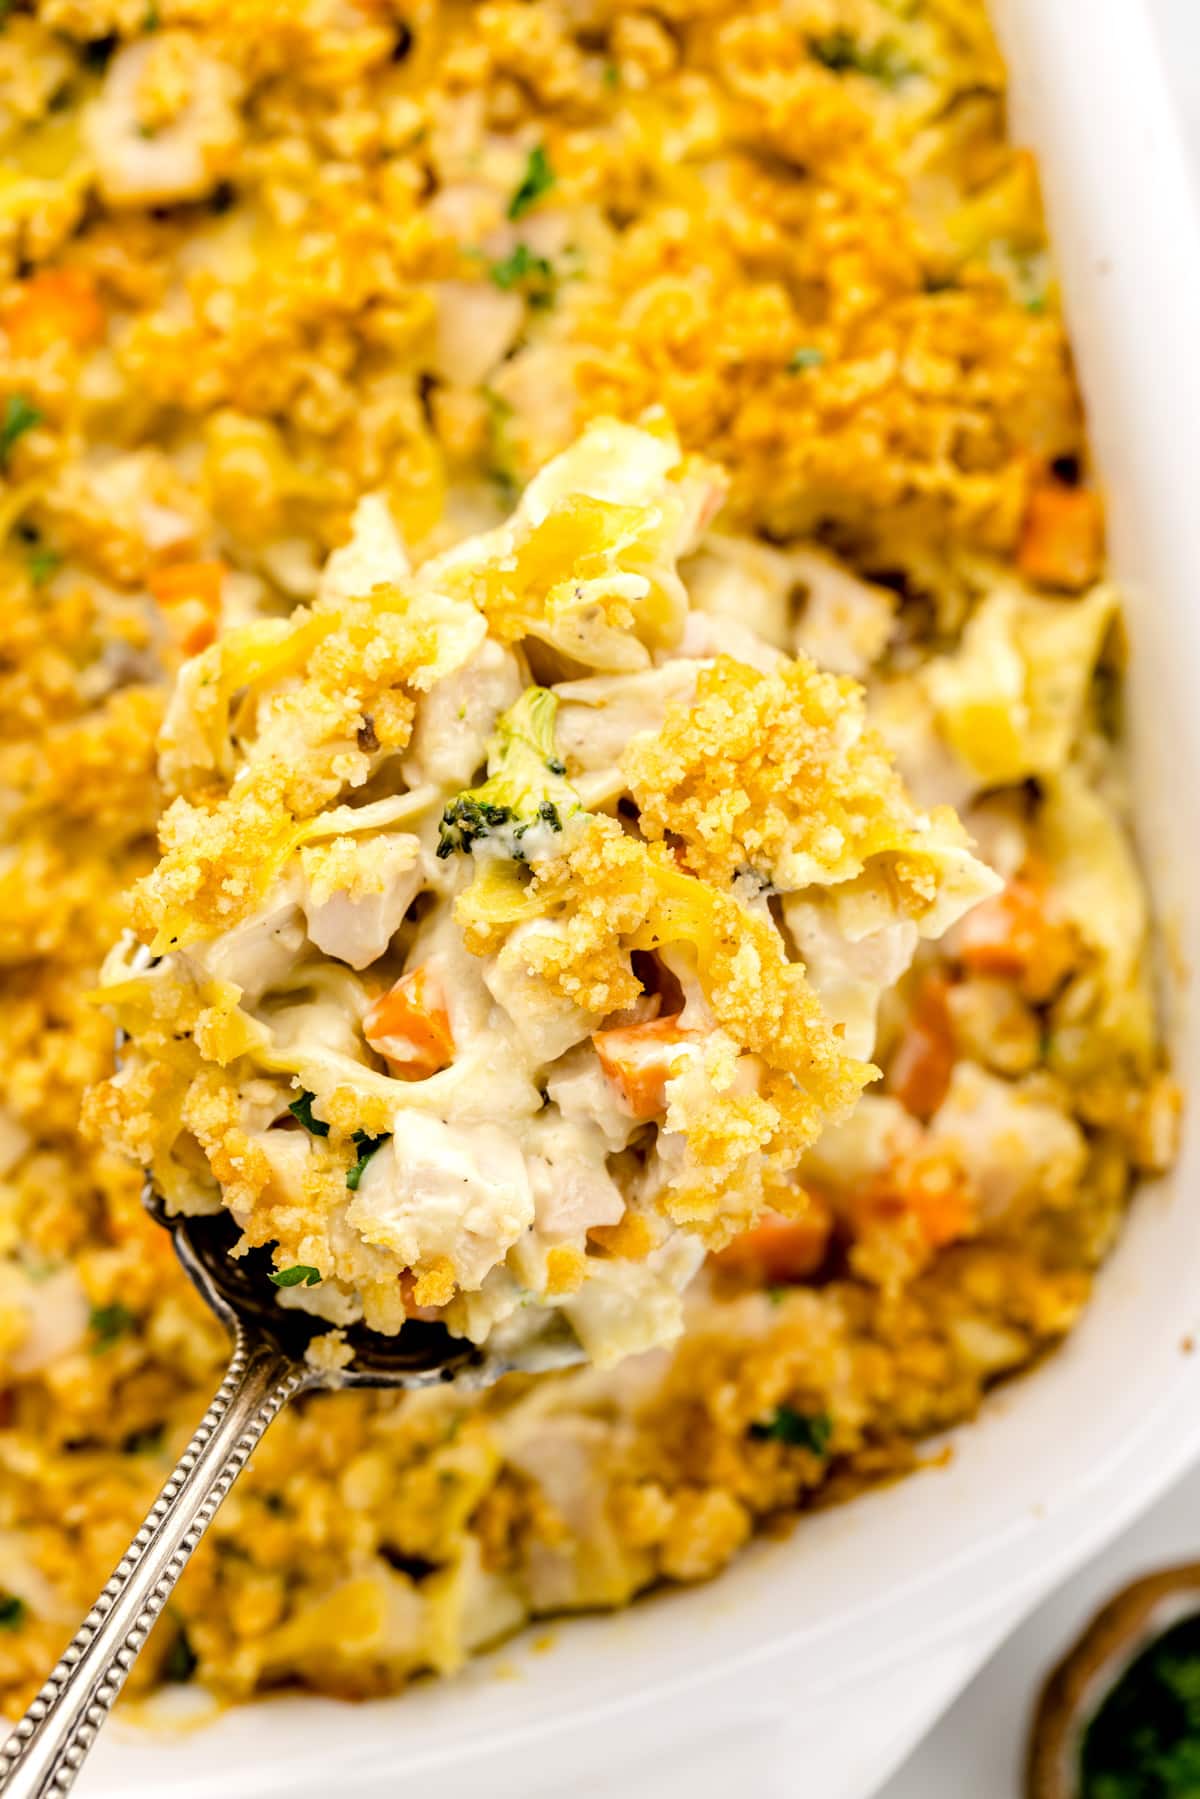 Close up of a scoop of chicken noodle casserole being pulled from a baking dish.